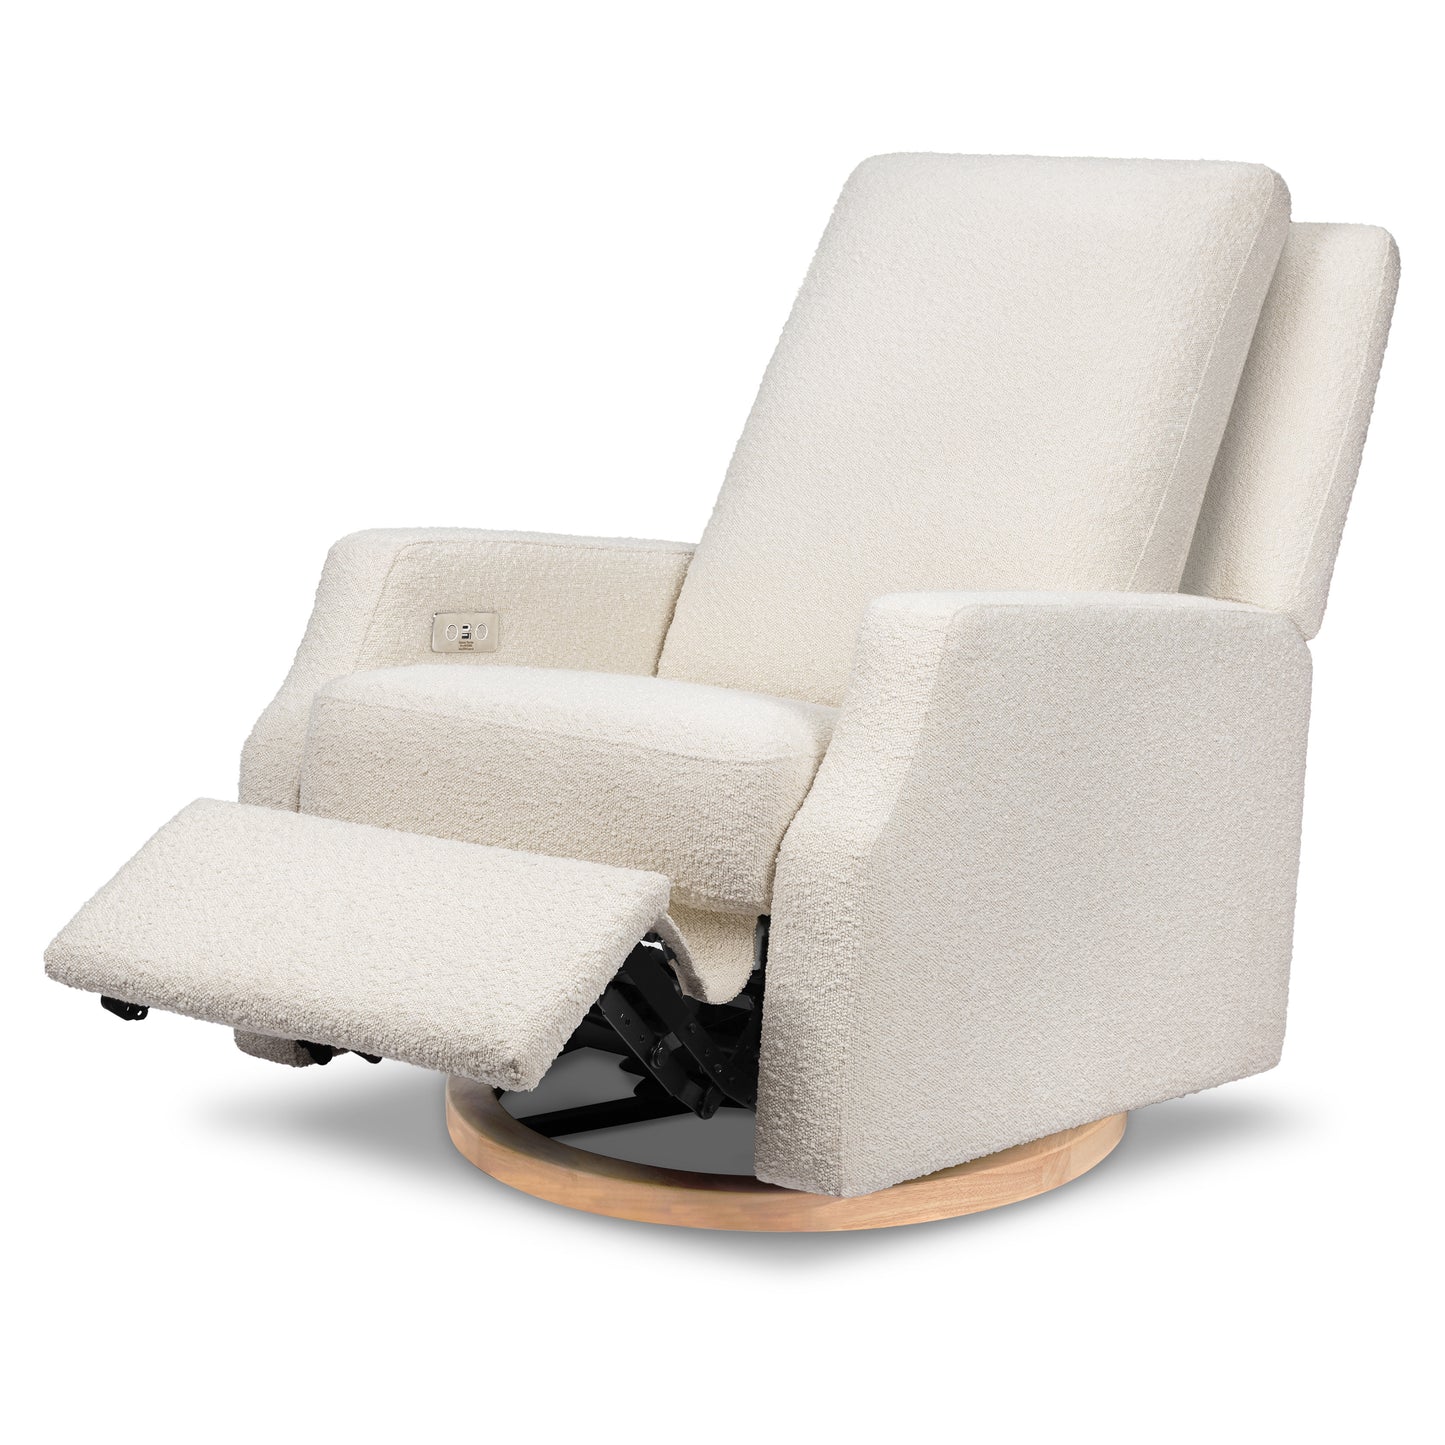 M22286WBLB,Crewe Electronic Swivel Glider Recliner in Ivory Boucle w/Light Wood Base